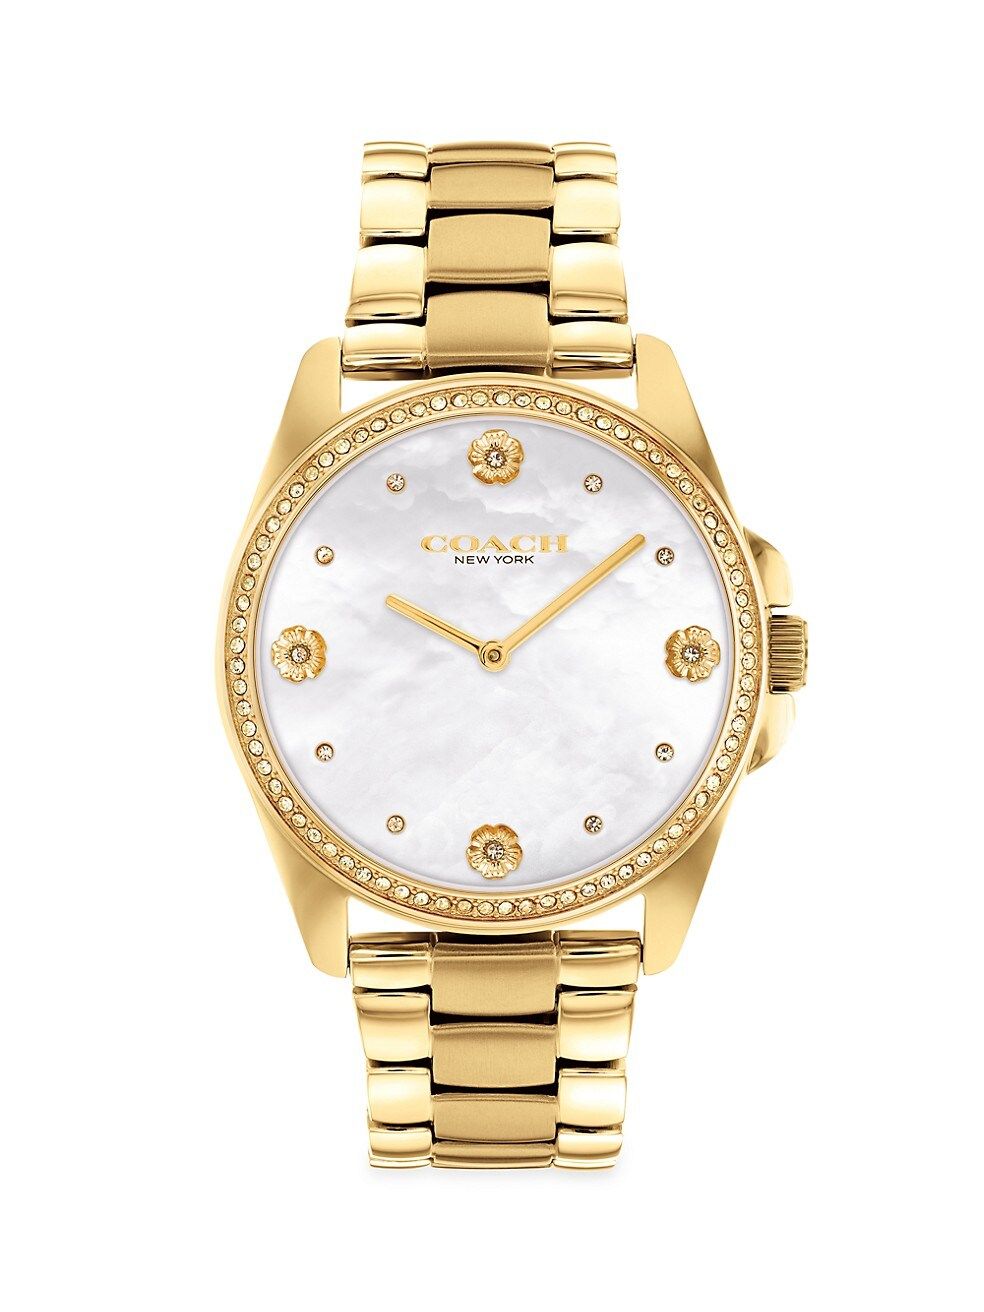 COACH Cruiser Gold-Plated Bracelet & Crystal Watch | Saks Fifth Avenue